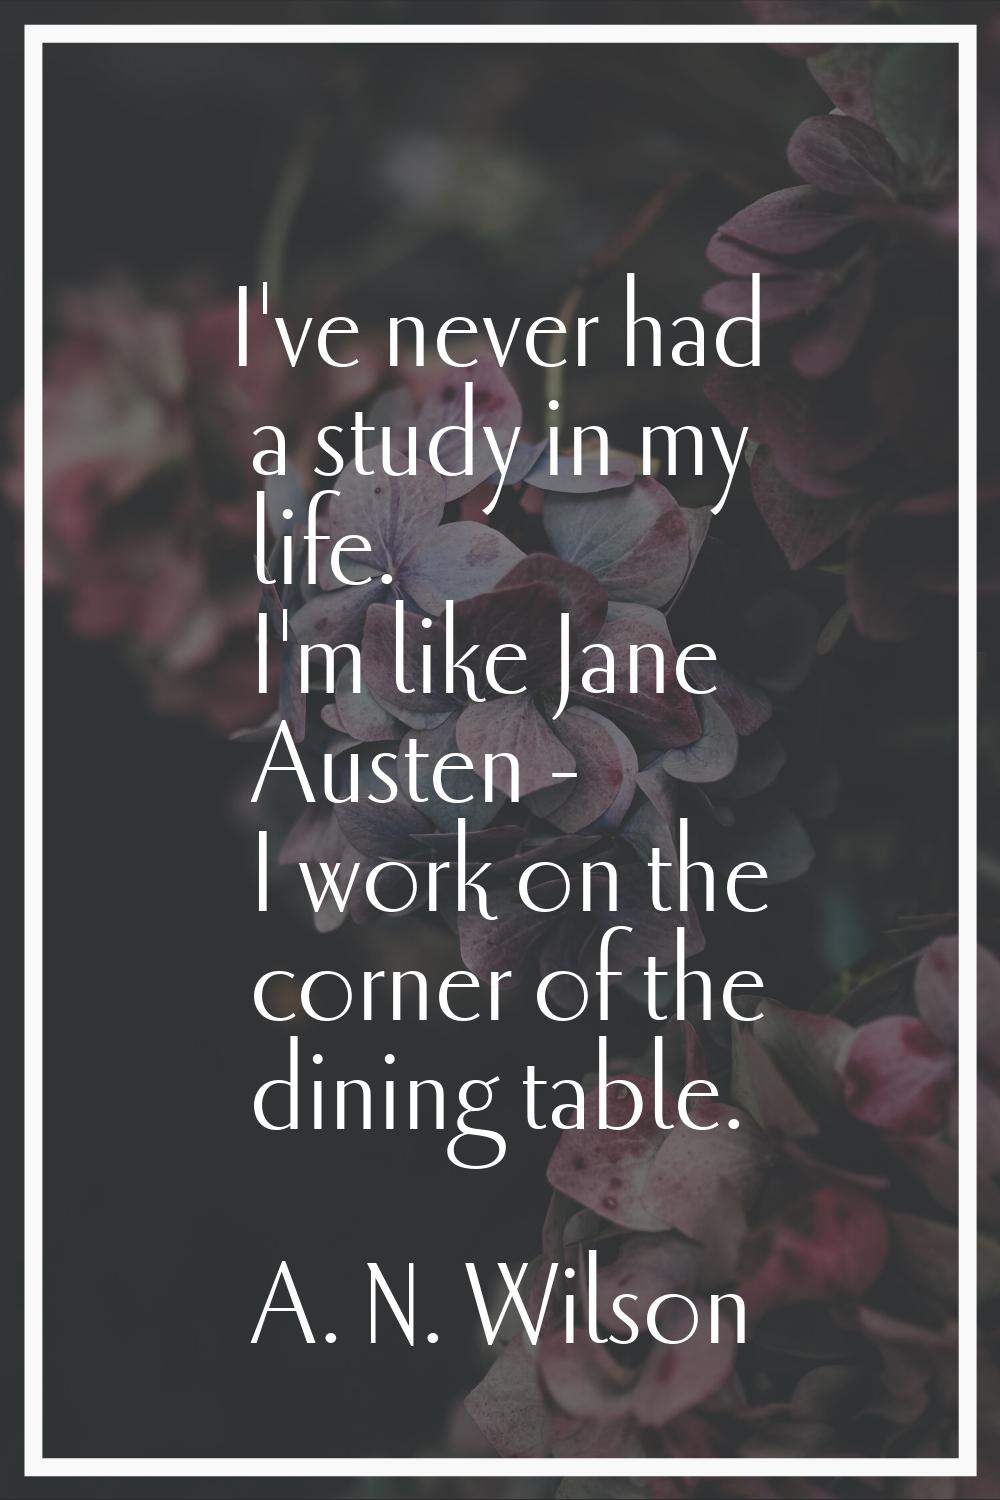 I've never had a study in my life. I'm like Jane Austen - I work on the corner of the dining table.